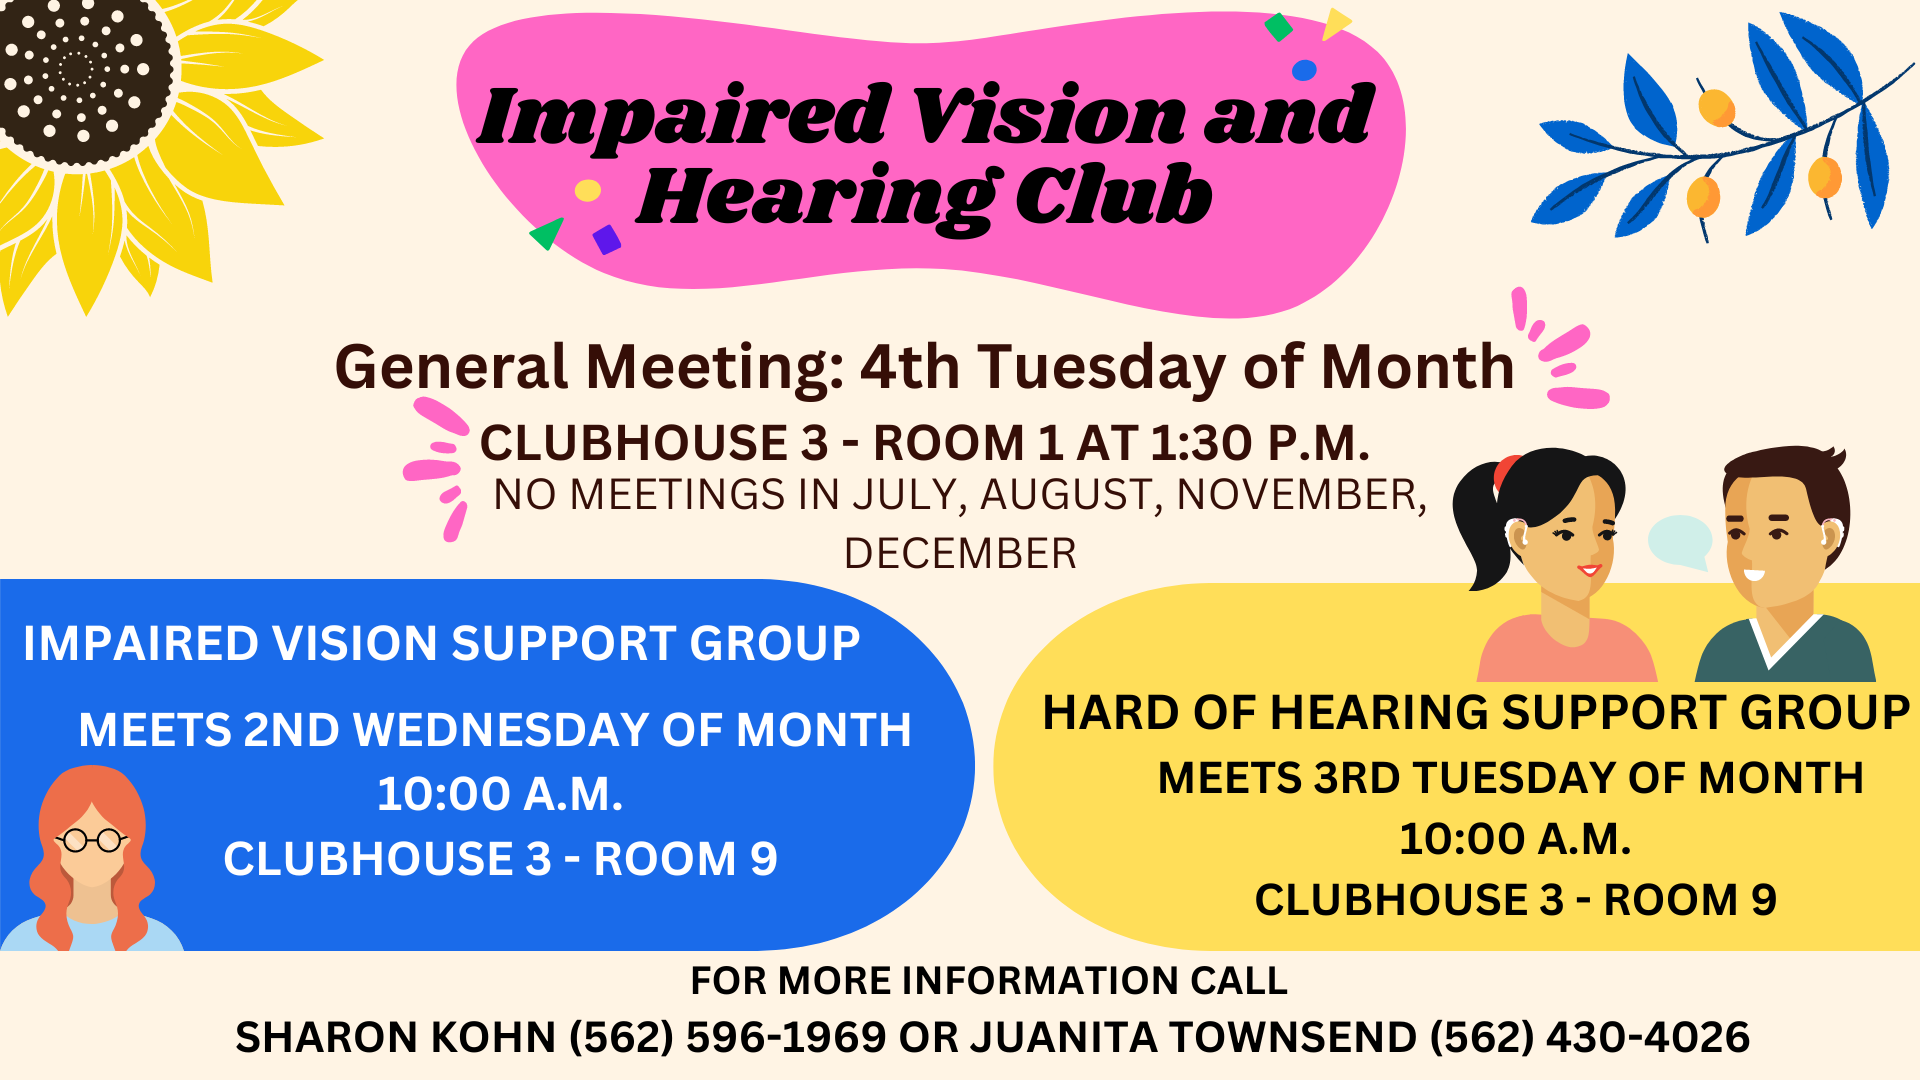 Impaired Vision and Hearing Club